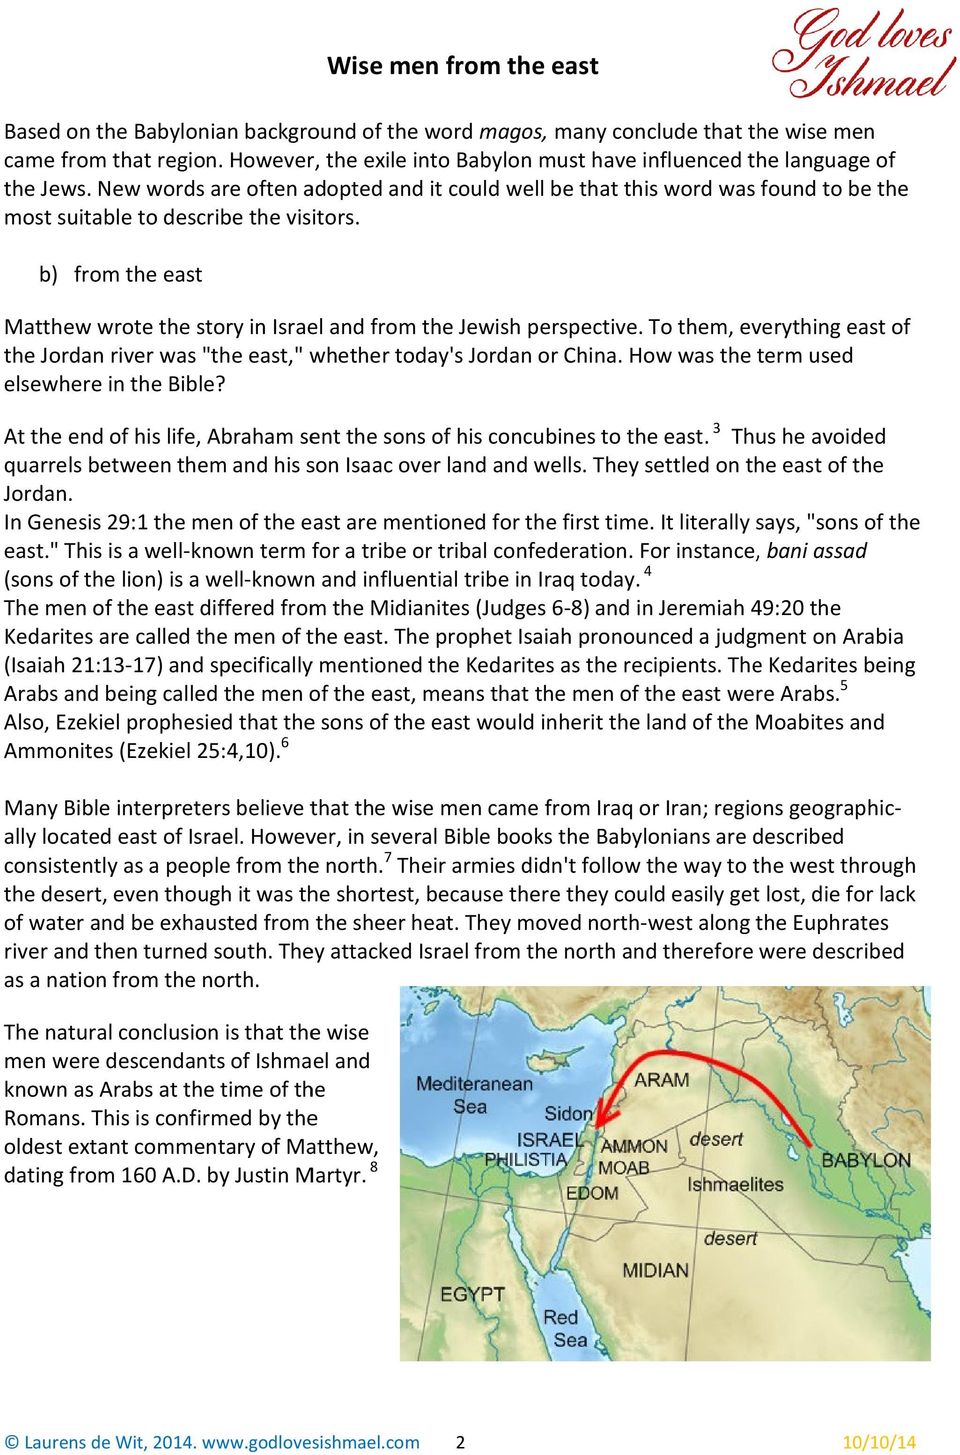 b) from the east Matthew wrote the story in Israel and from the Jewish perspective. To them, everything east of the Jordan river was "the east," whether today's Jordan or China.